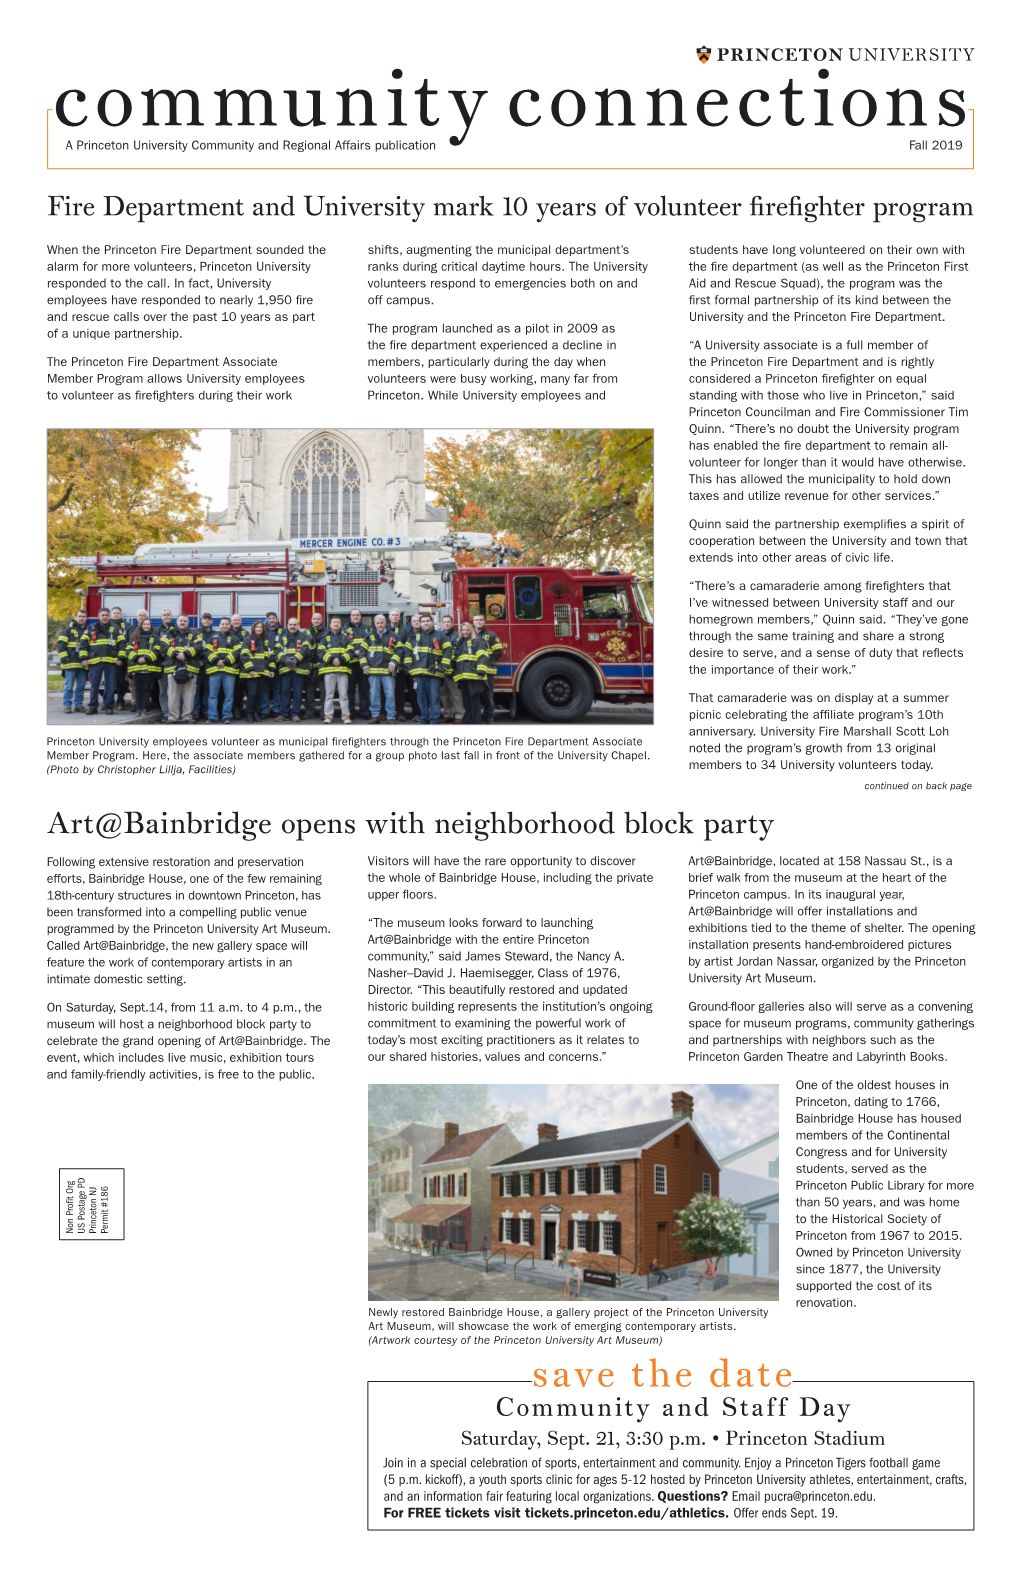 Community Connections a Princeton University Community and Regional Affairs Publication Fall 2019